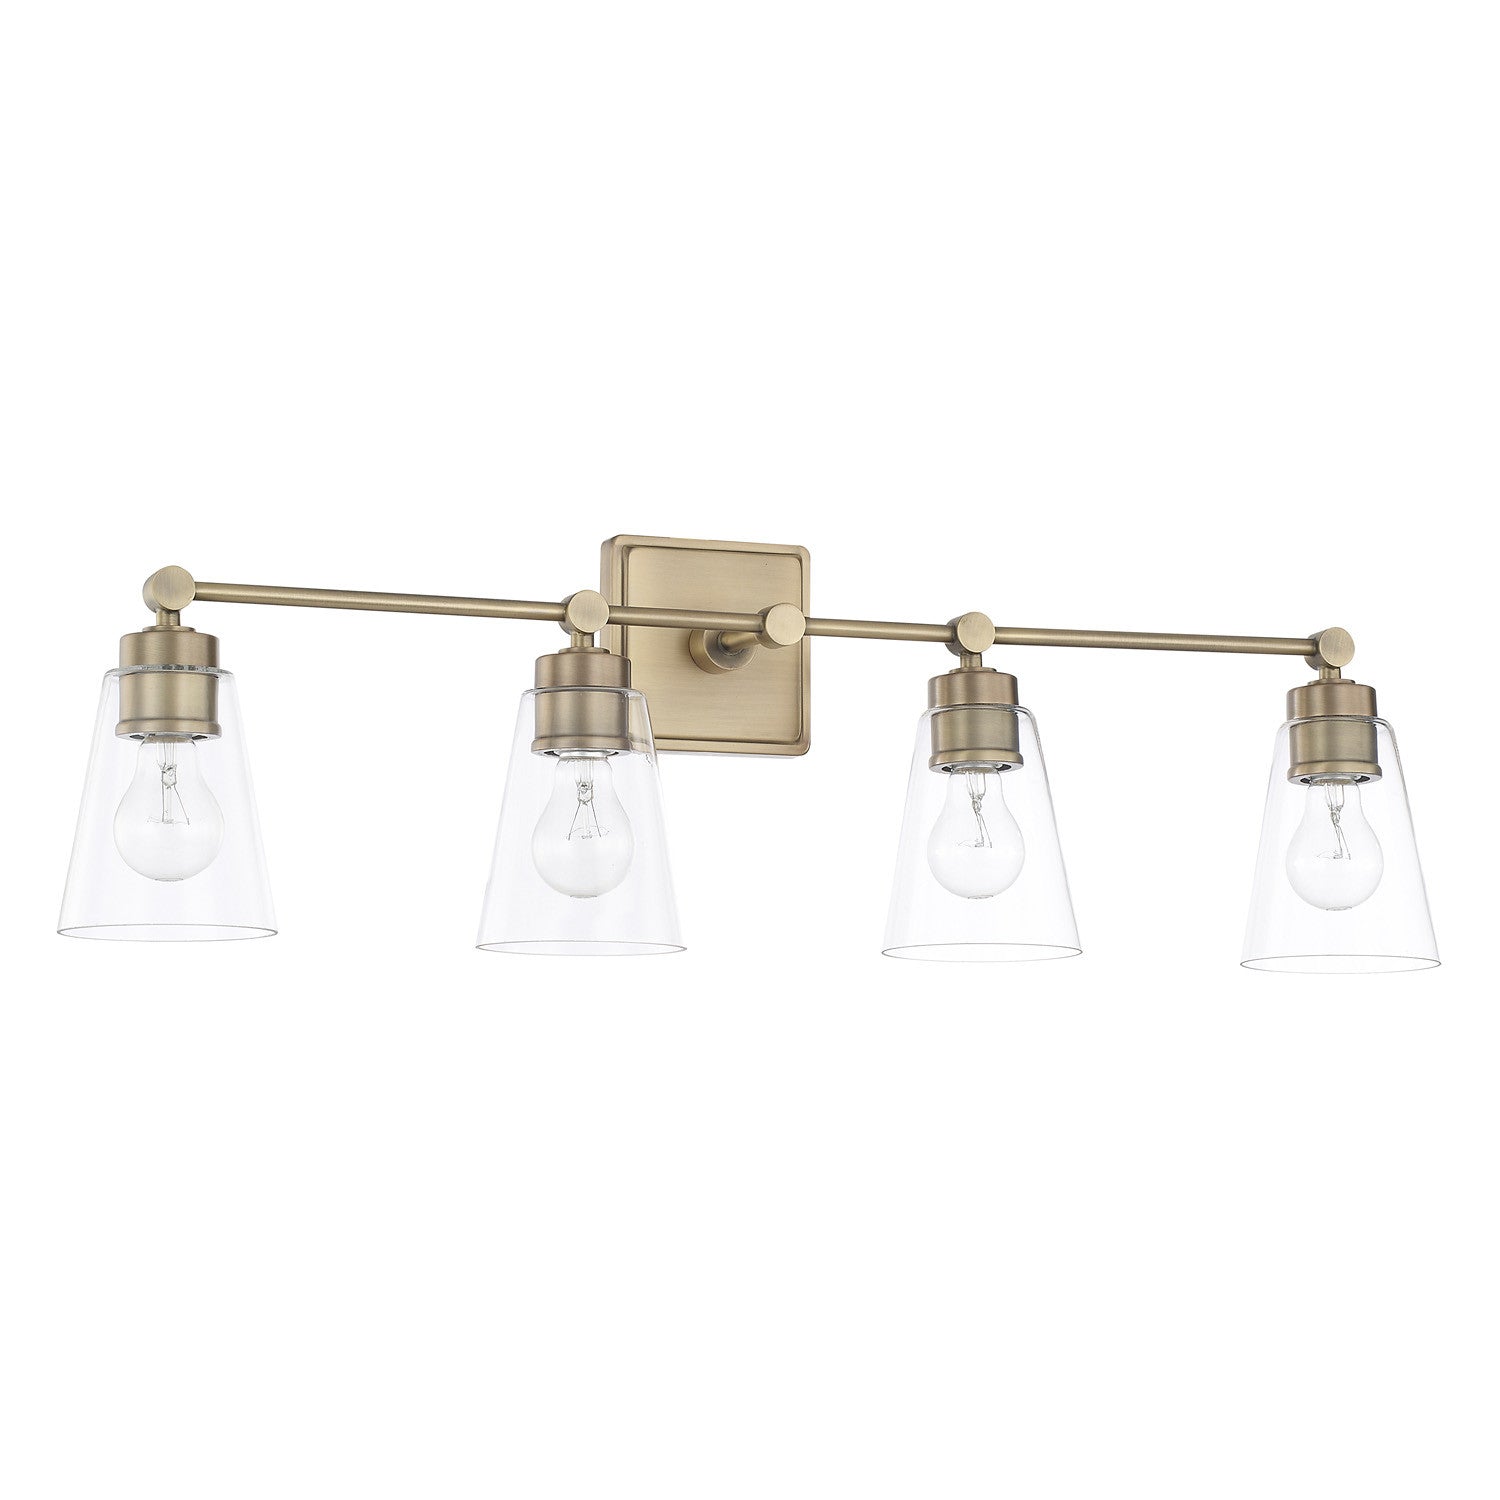 Enright 4 Light Vanity in Aged Brass with Clear Cone Glass Shades by Capital Lighting 121841AD-432